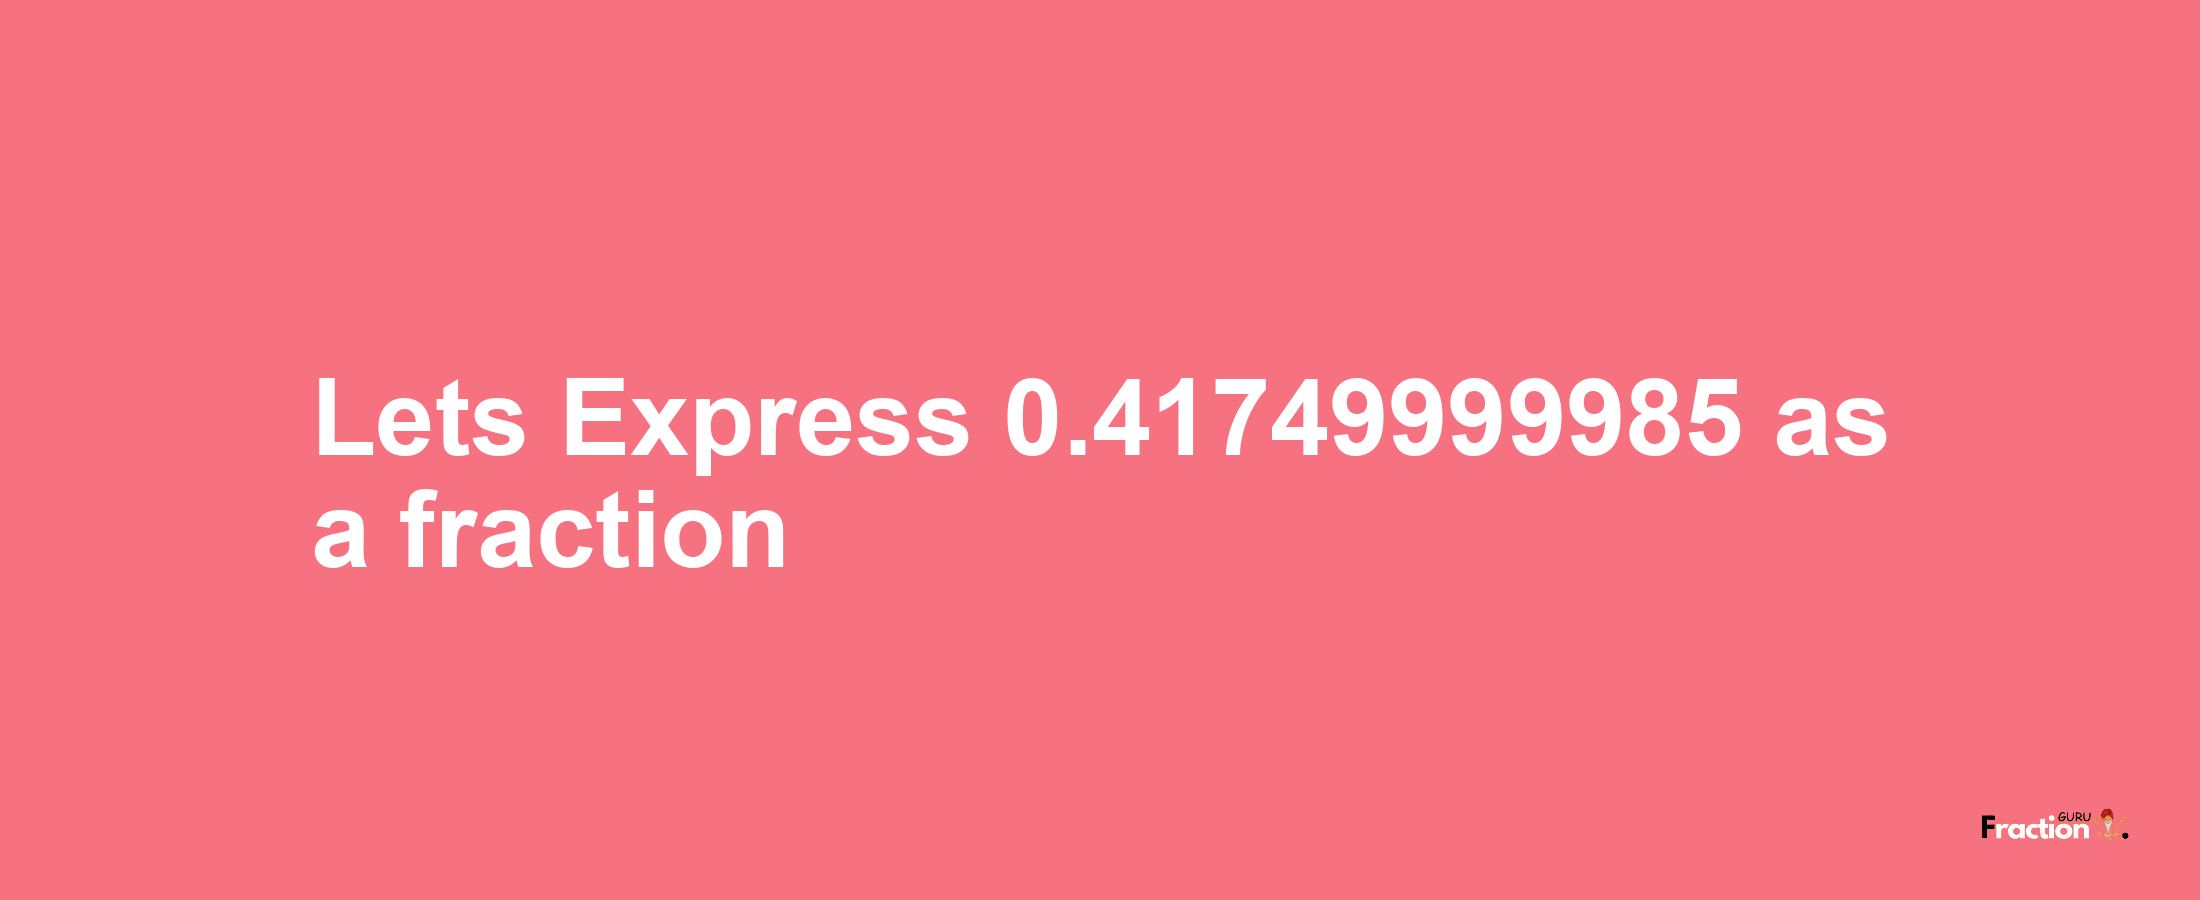 Lets Express 0.41749999985 as afraction